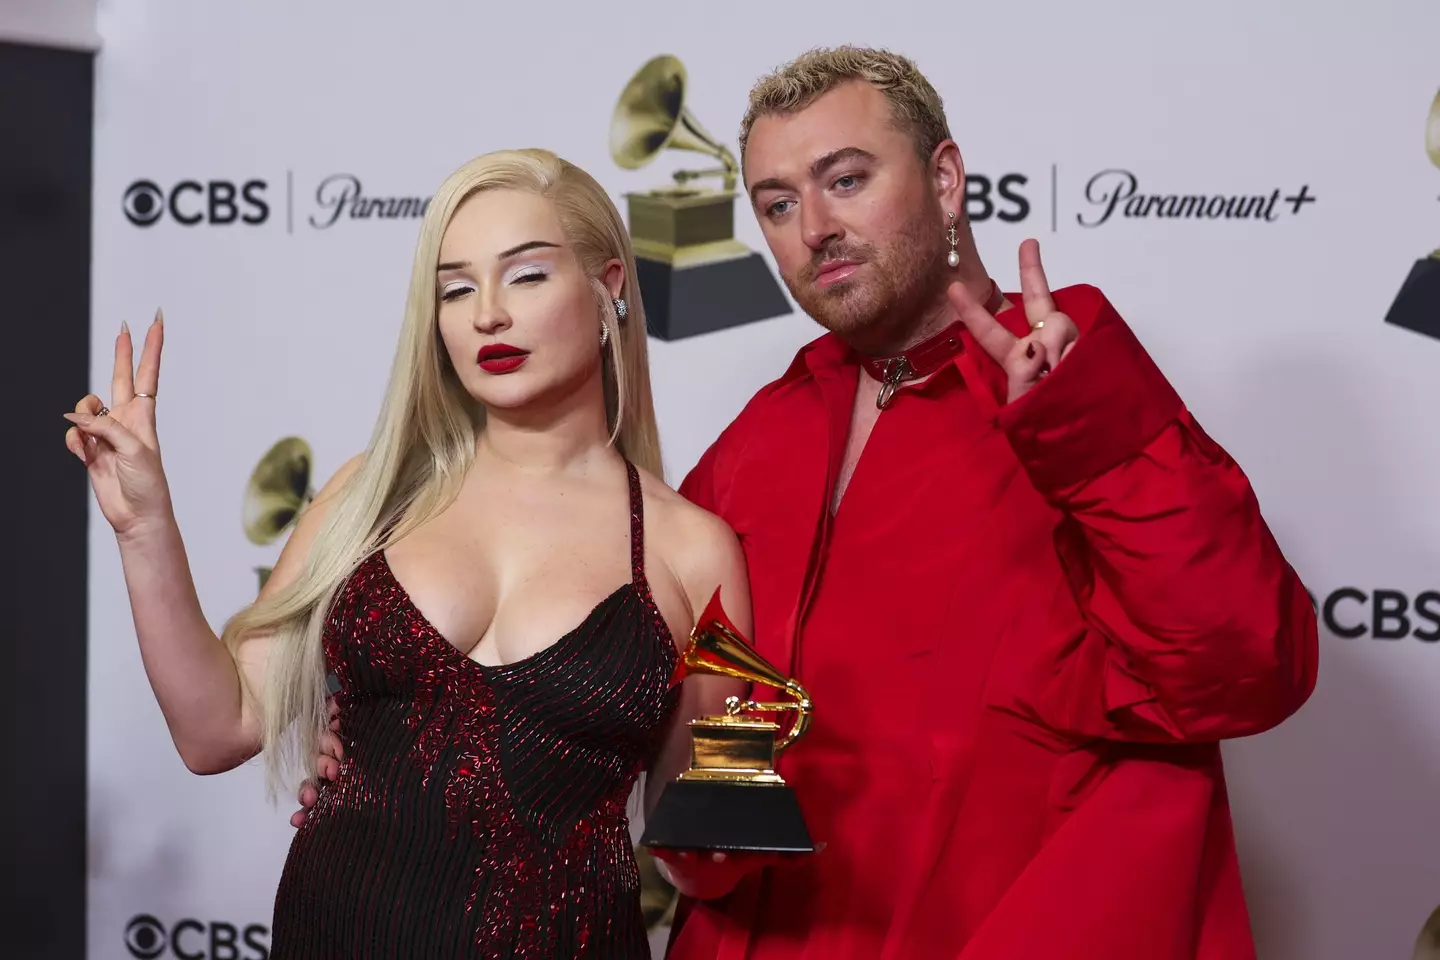 Sam Smith and Kim Petras won a Grammy for the song.